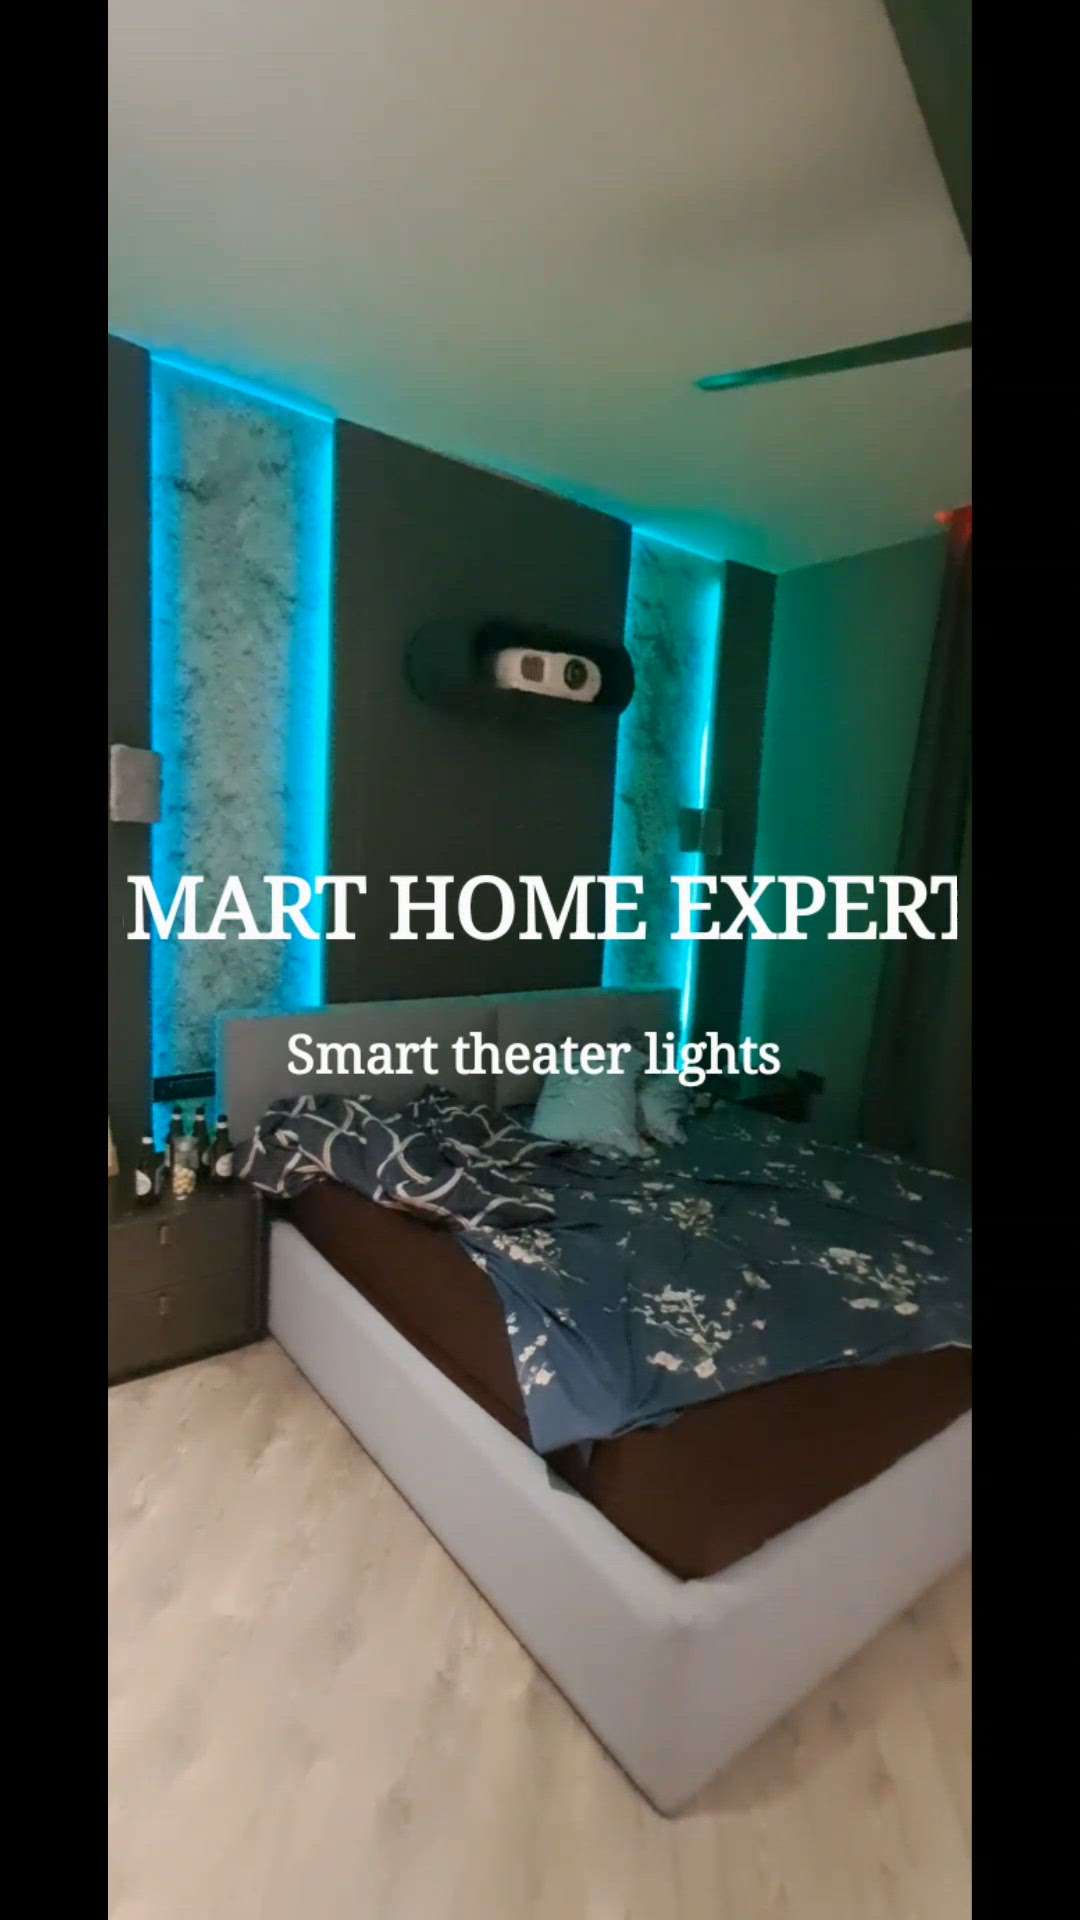 smart theater lights 
smart home theater completely controlling with mobile app